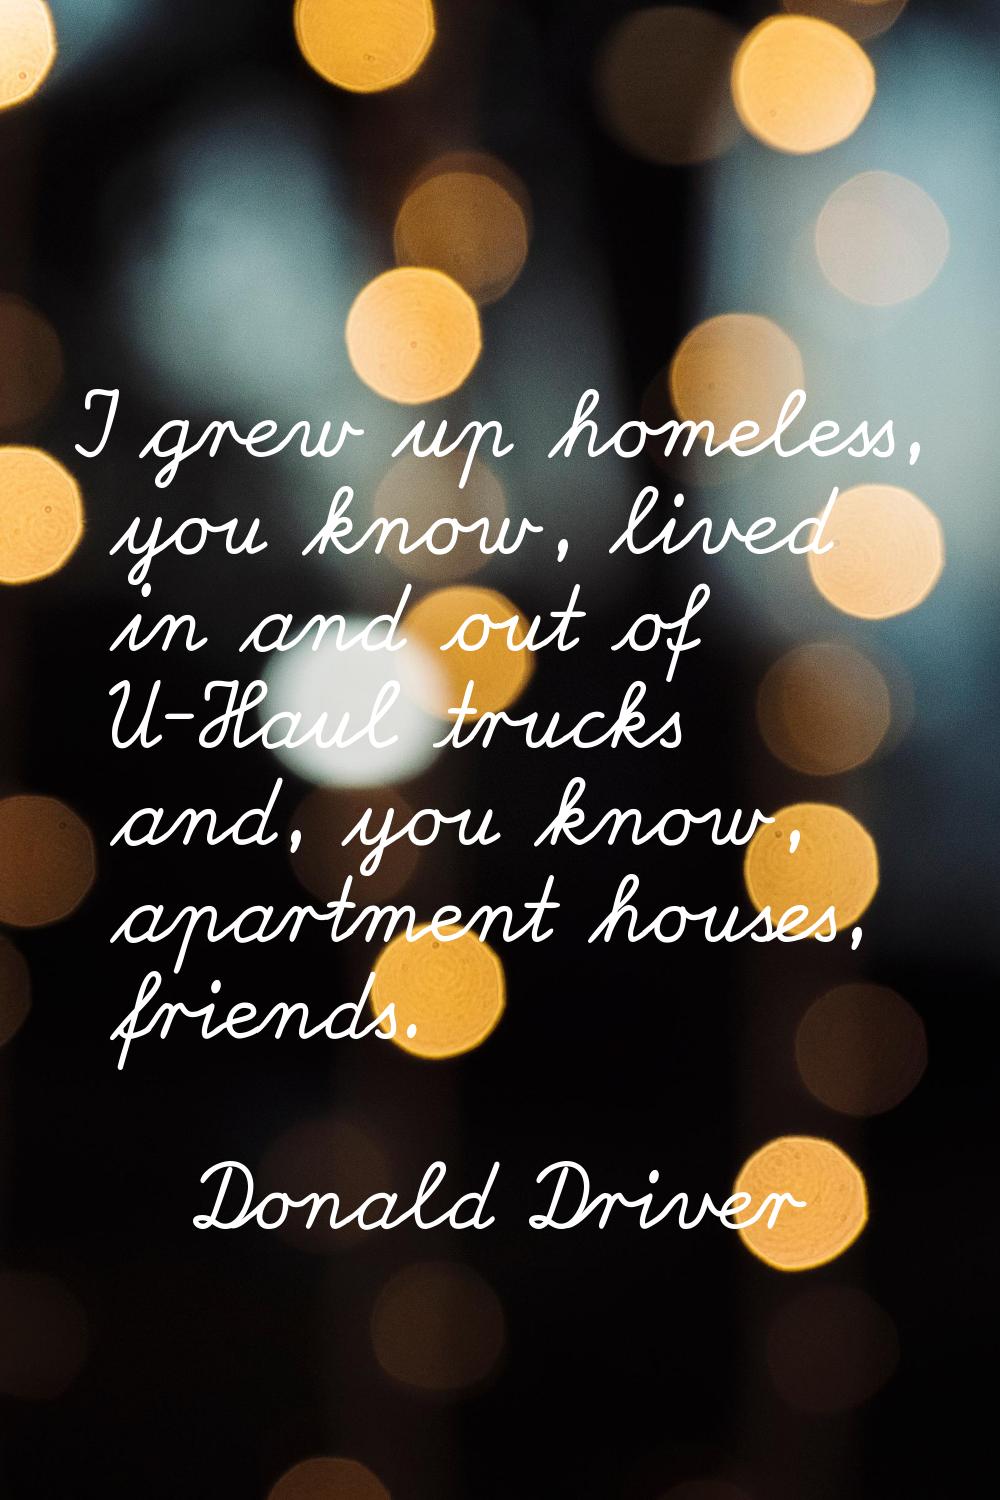 I grew up homeless, you know, lived in and out of U-Haul trucks and, you know, apartment houses, fr